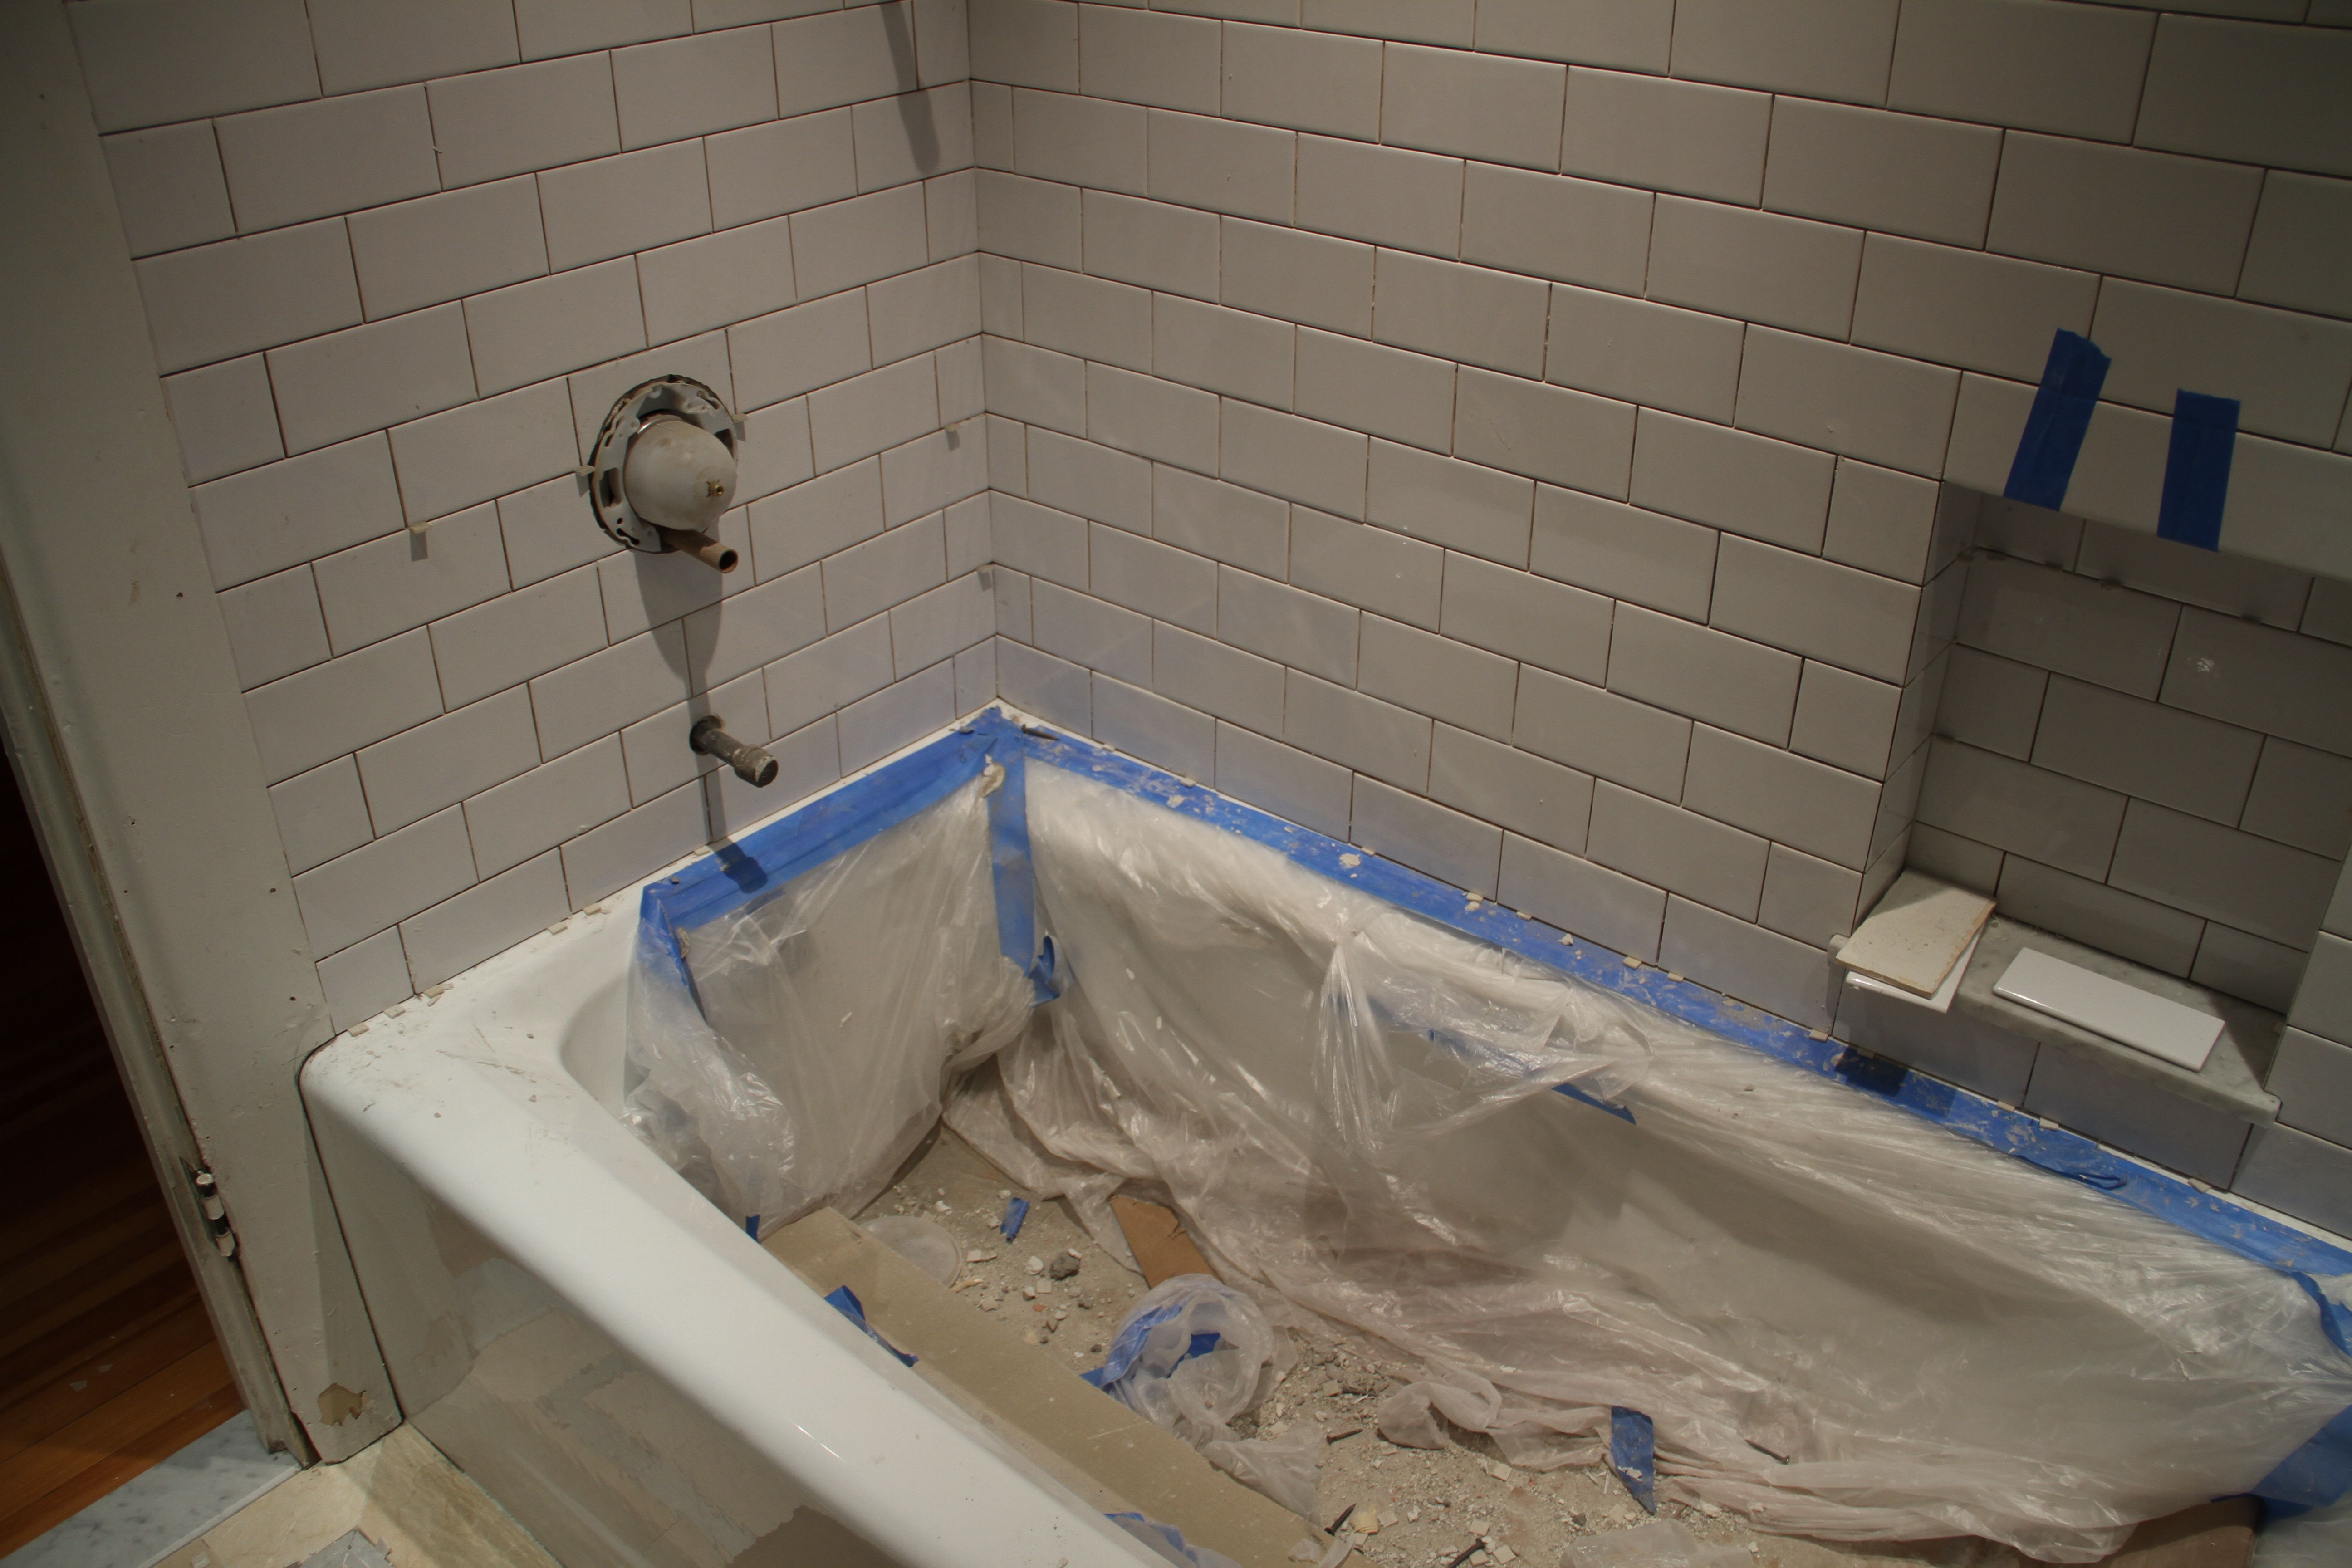 And, so the tub needs a little attention. But, check out how well all the valves lined up in the tiles!